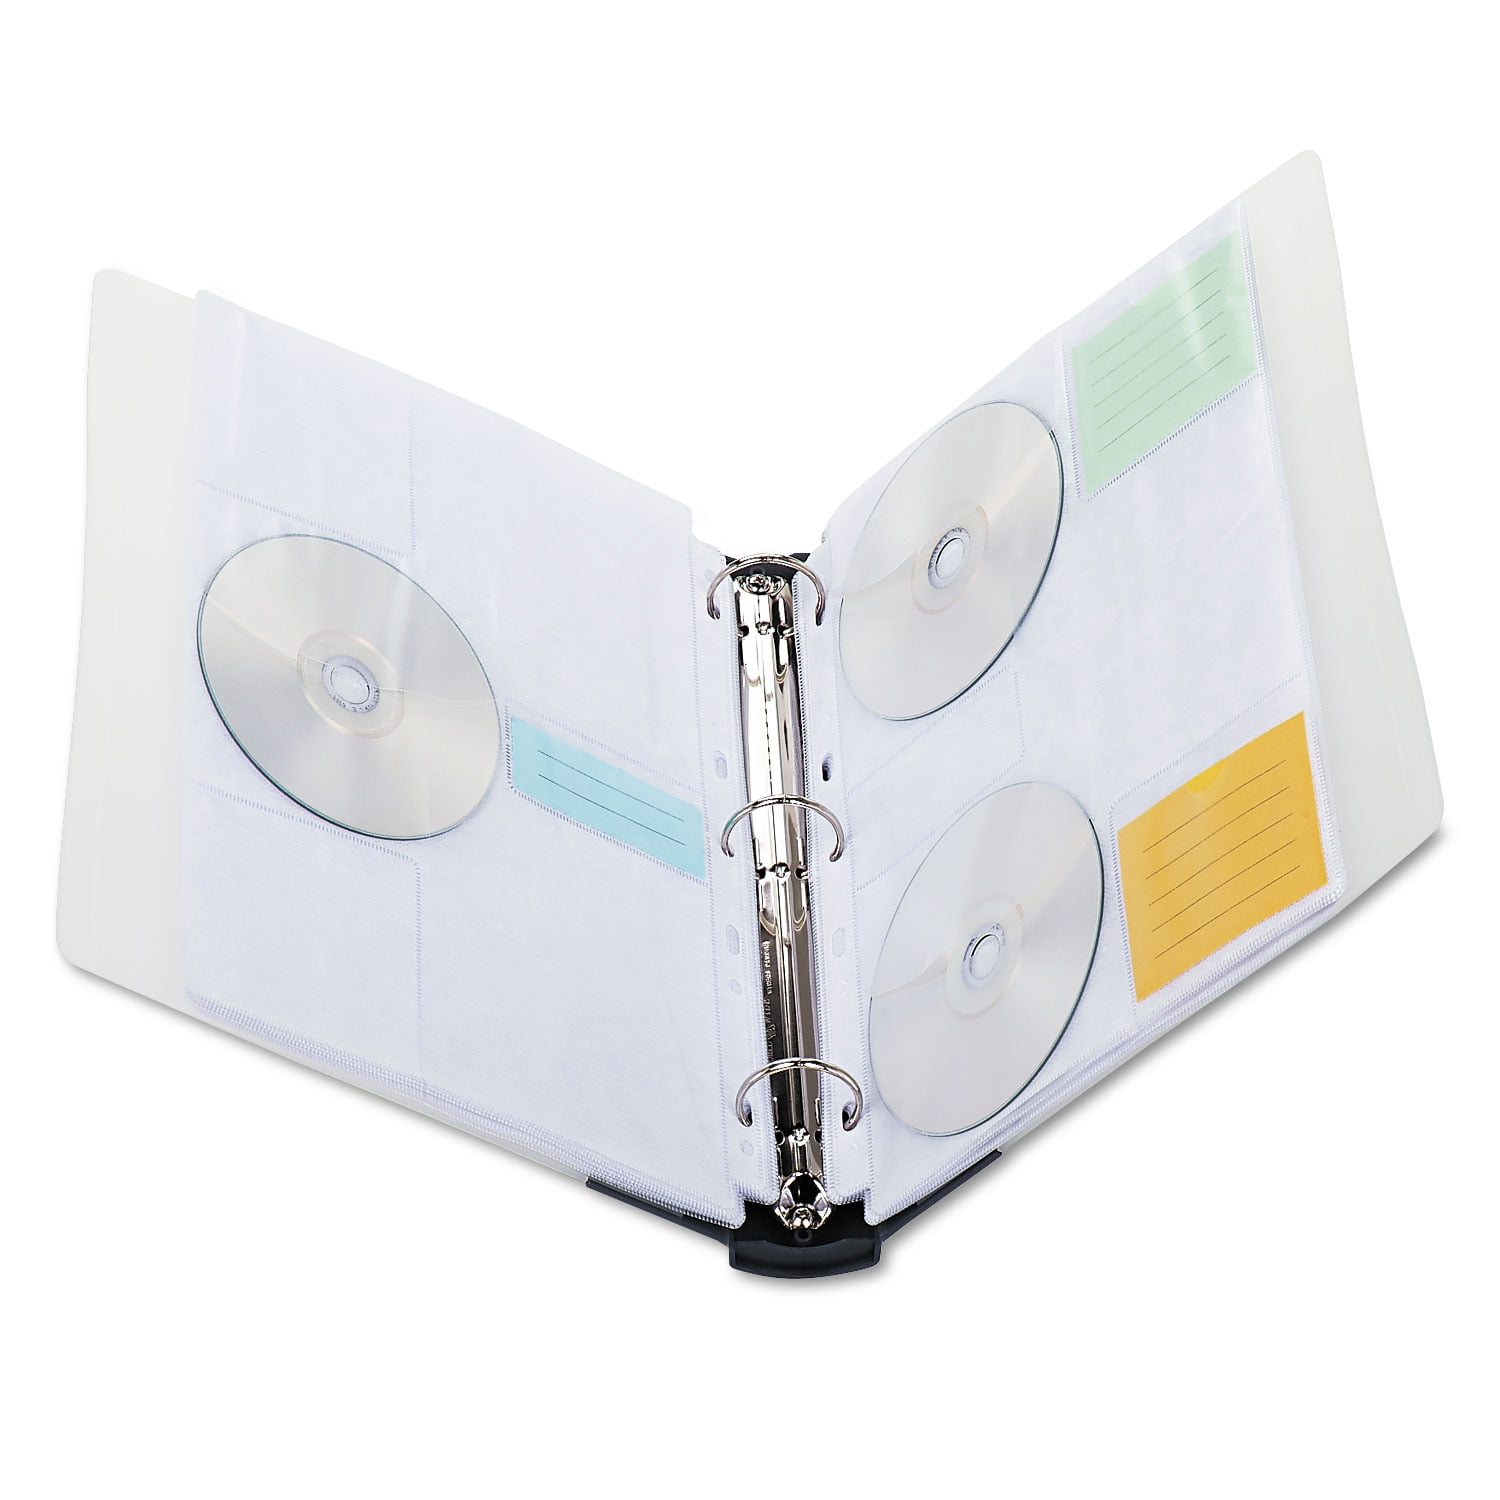 C-Line 61948 Standard Stores 8 CDs Deluxe CD Ring Binder Storage Pages 5/PK New 